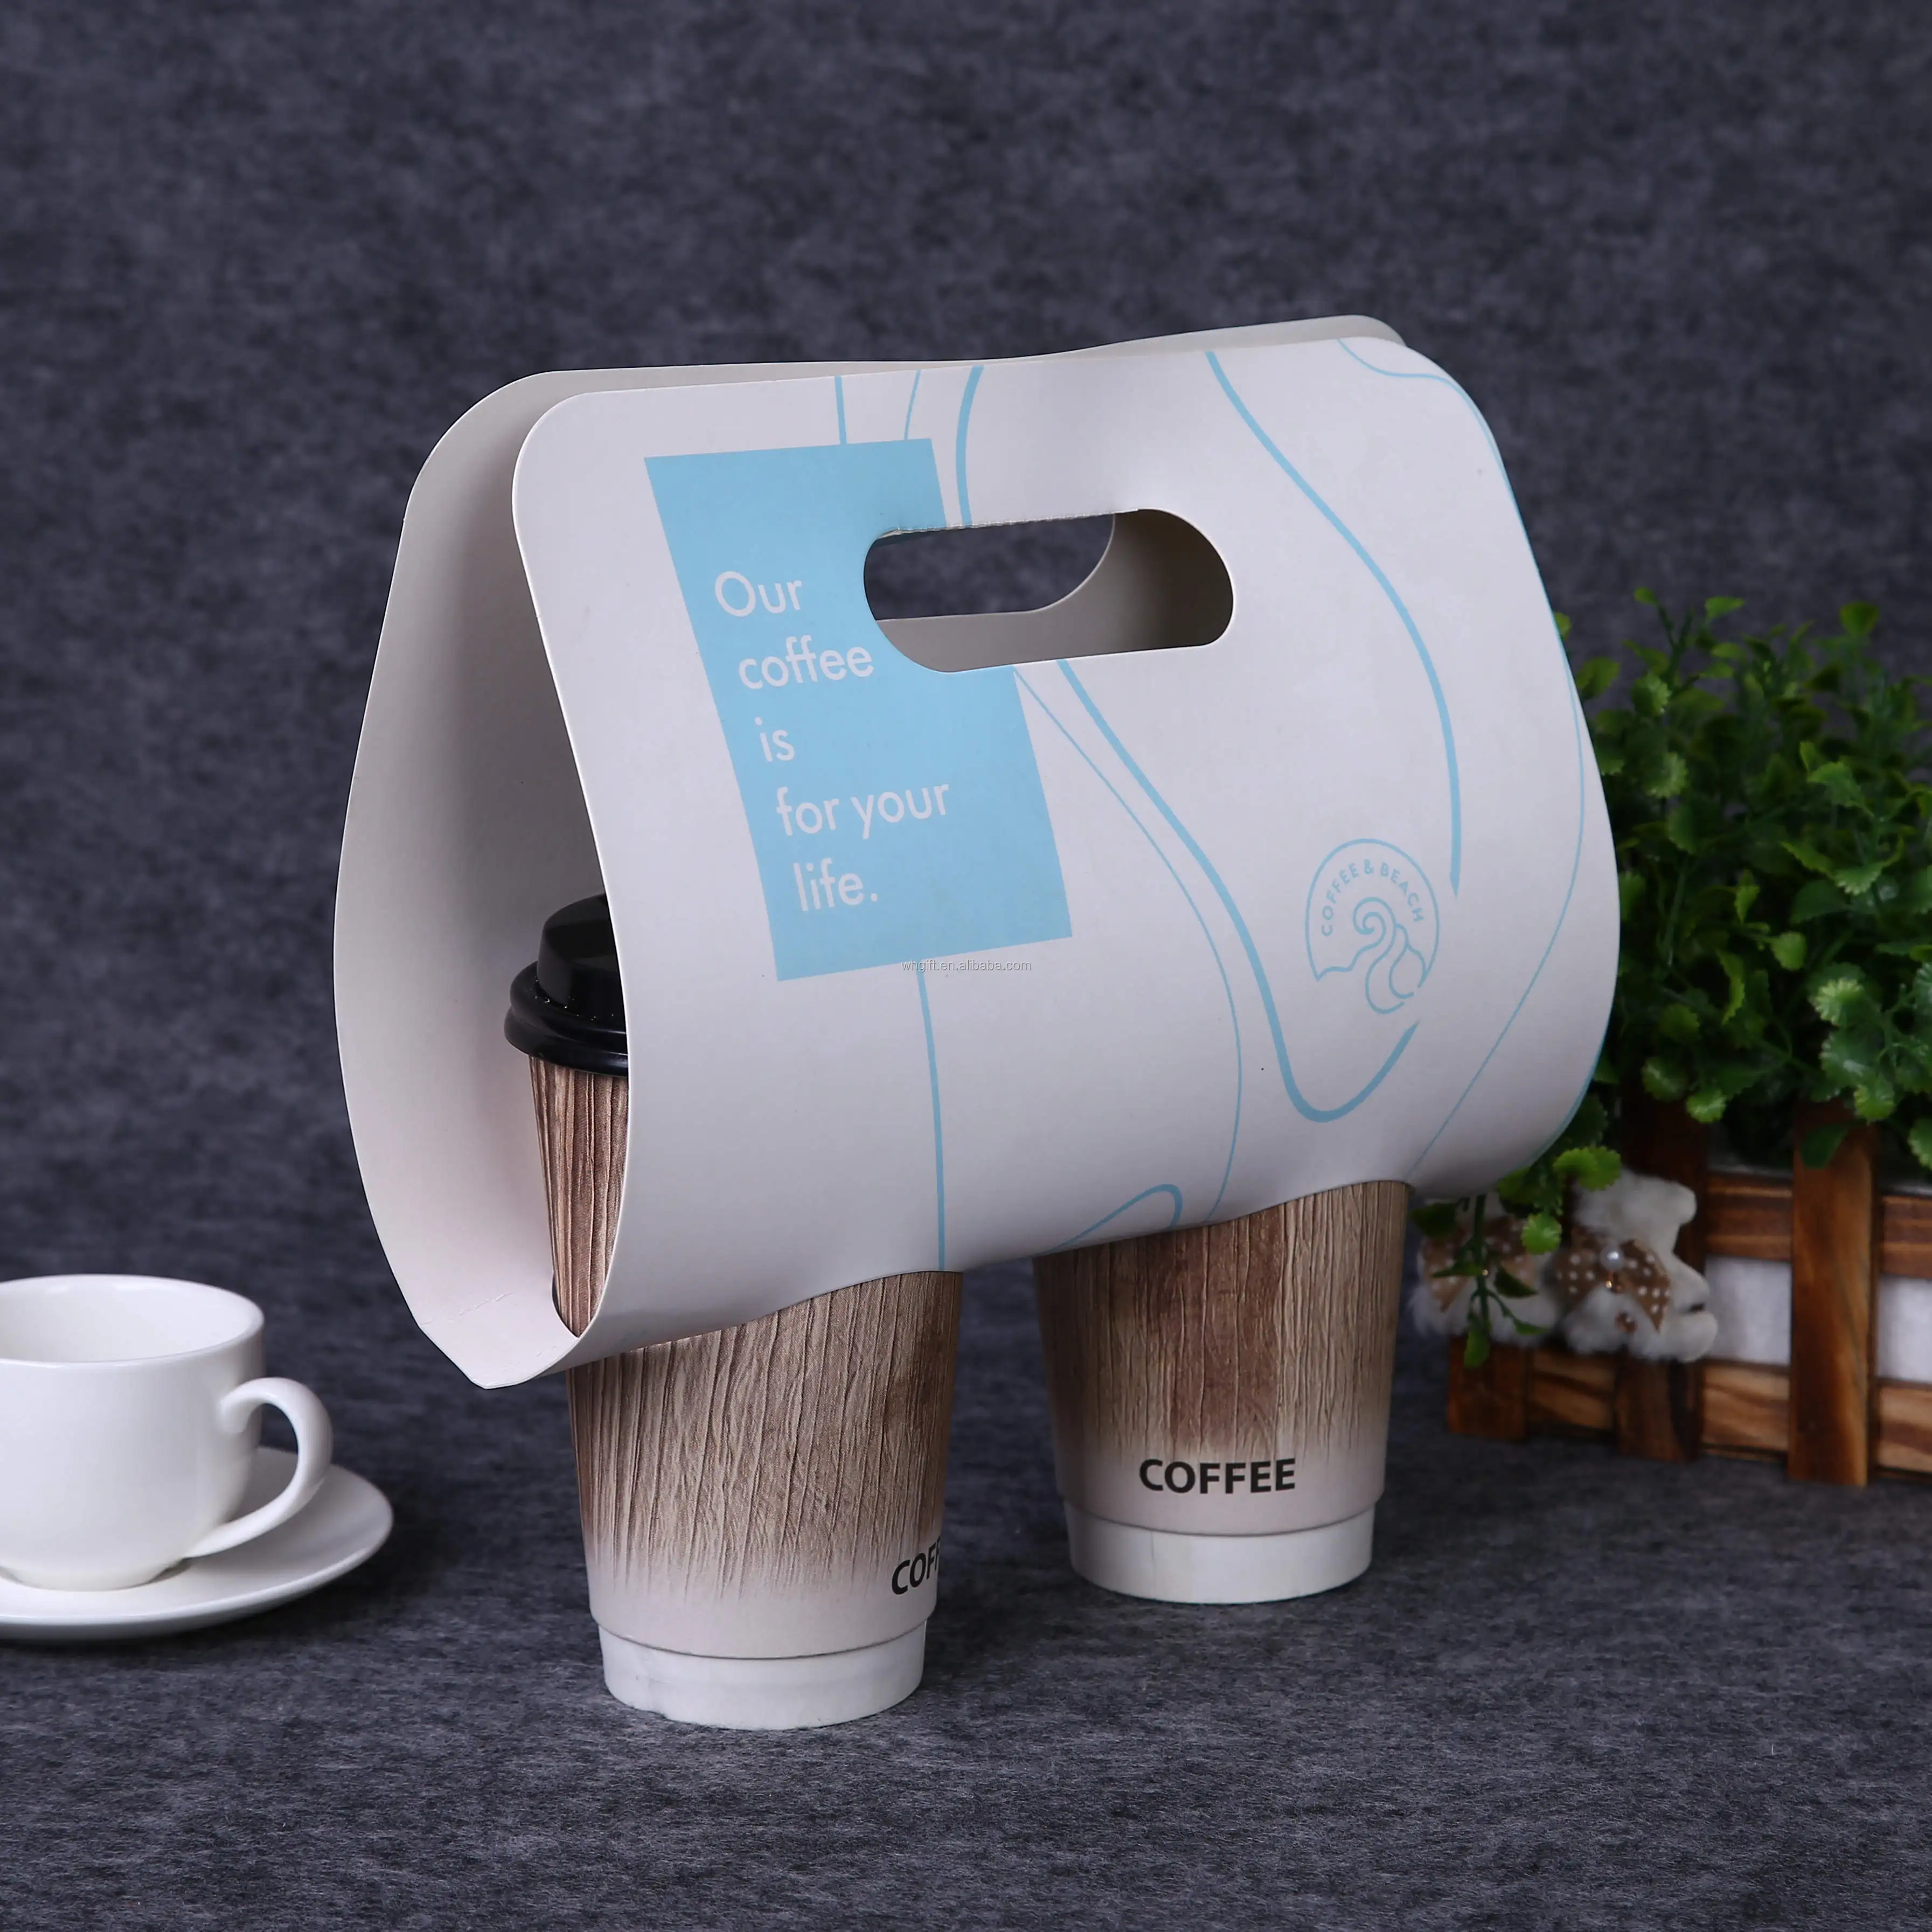 Tea Coffee Hot And Cold Drinks Double Cup Paper Cardboard Tray Holder ...